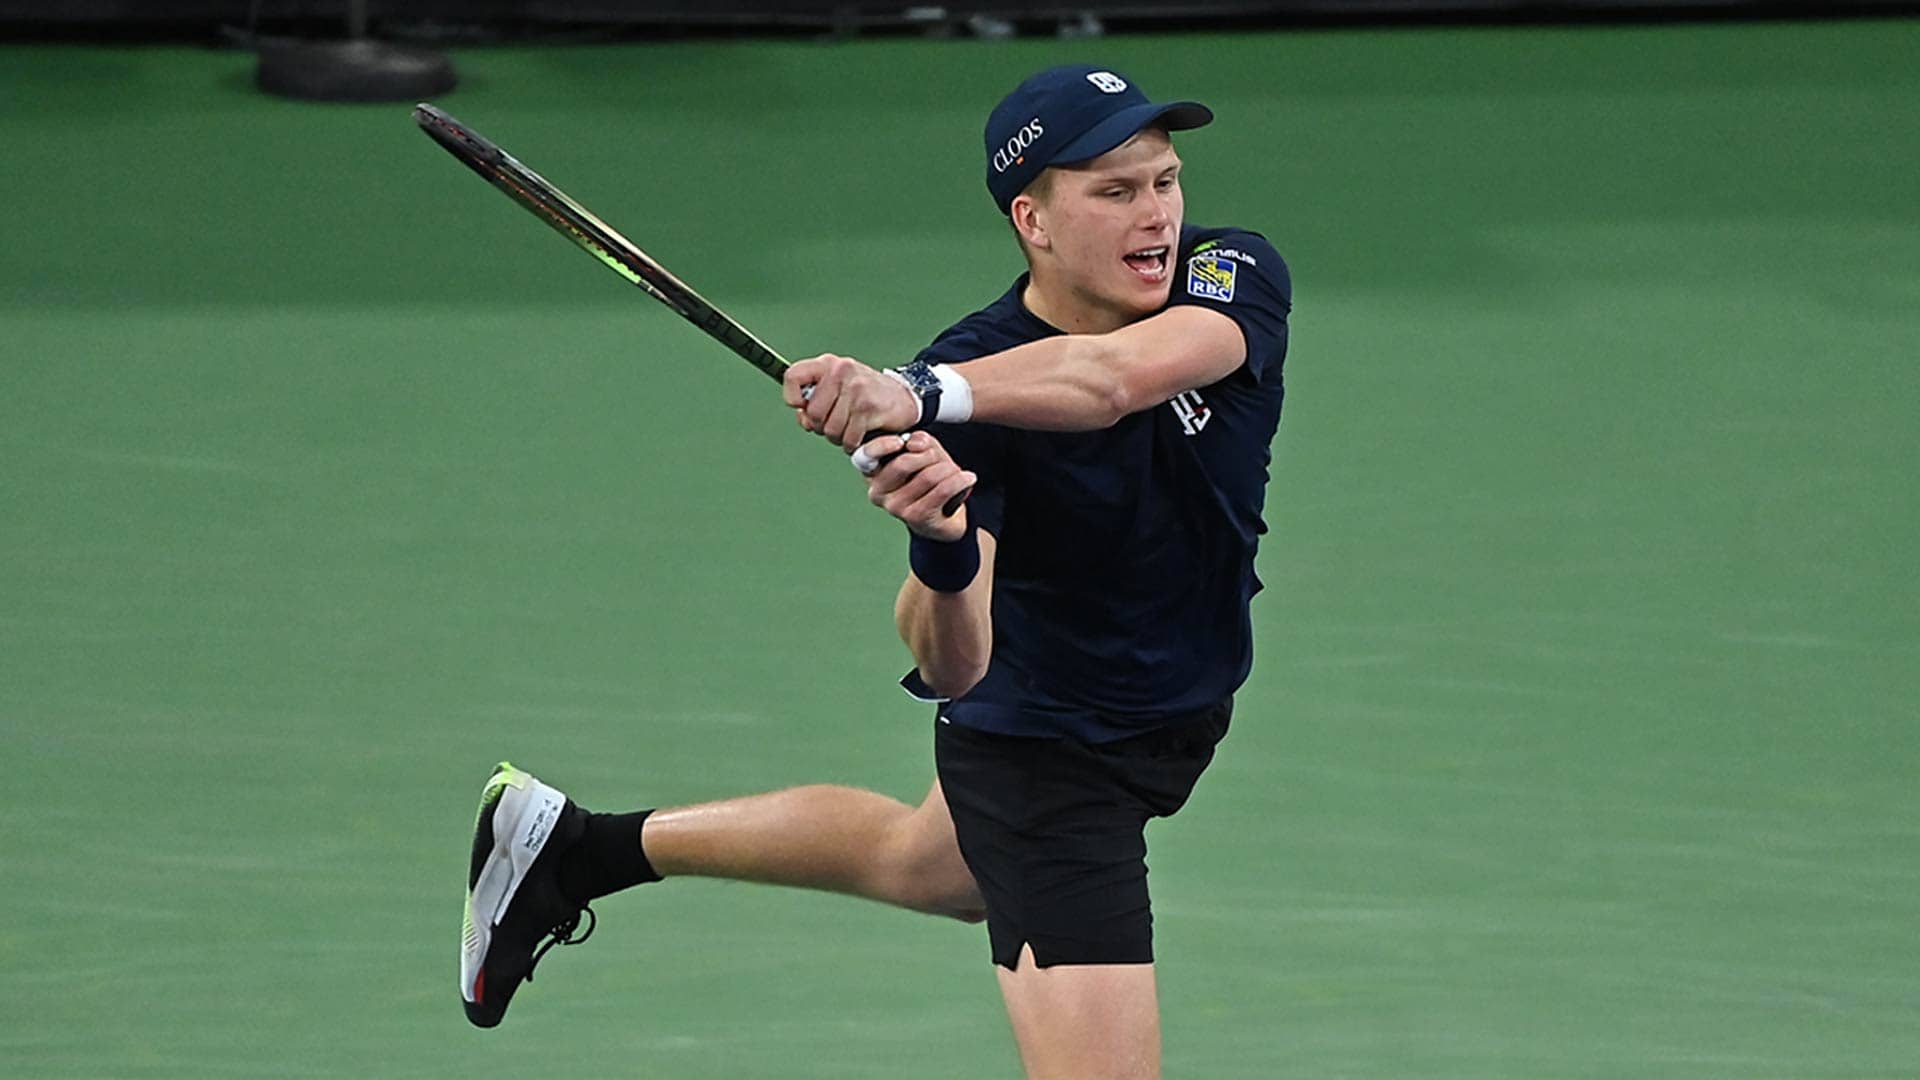 Jenson Brooksby discusses his tennis superpower at the BNP Paribas Open